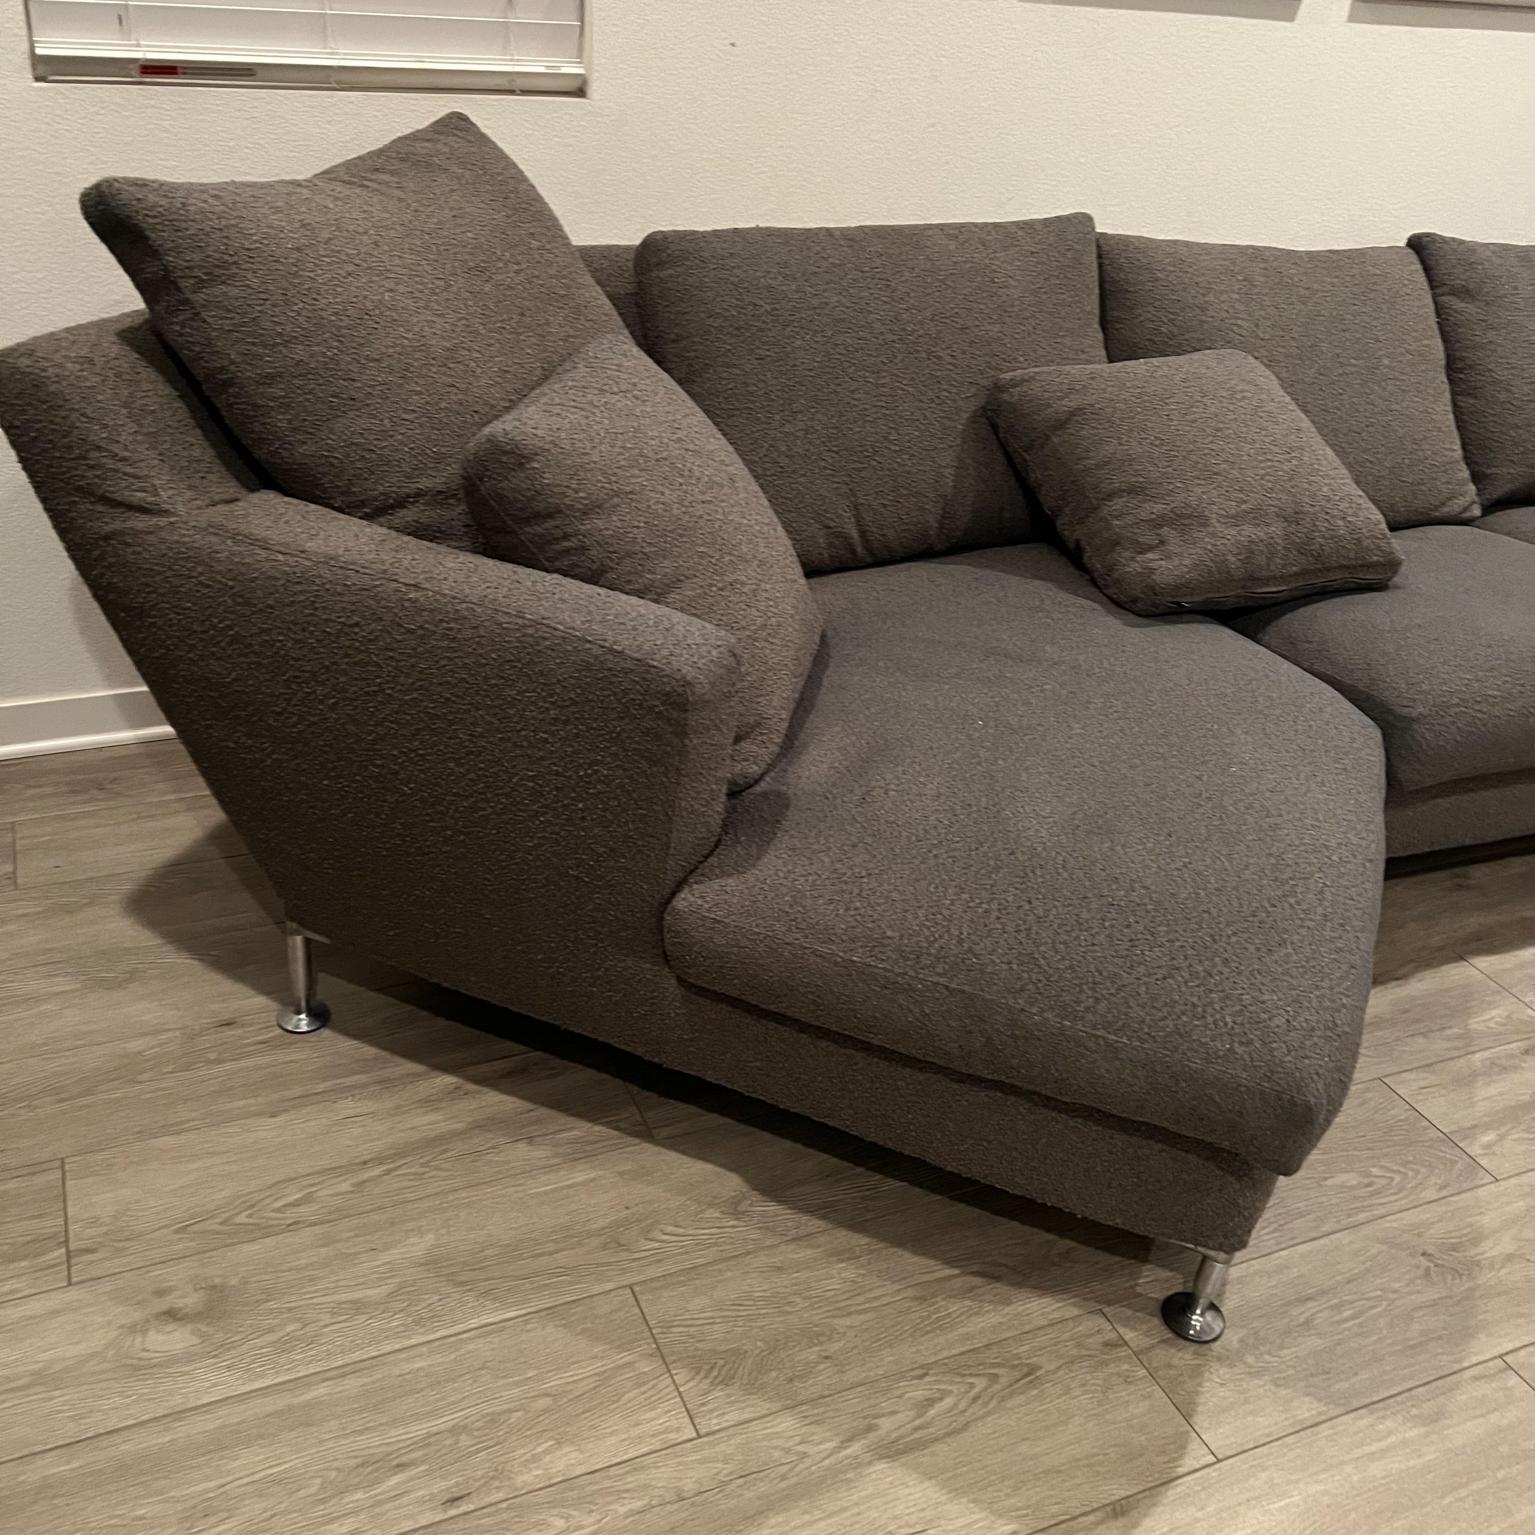 Sectional sofa HARRY designed by Antonio Citterio for B&B.
The 'Harry' sofa is named after Harry Bertoia
Made in Italy for the USA.
Sectional features 2 seats with lounge seat on the left side. 
Booster cushions included.
Iconic aluminum